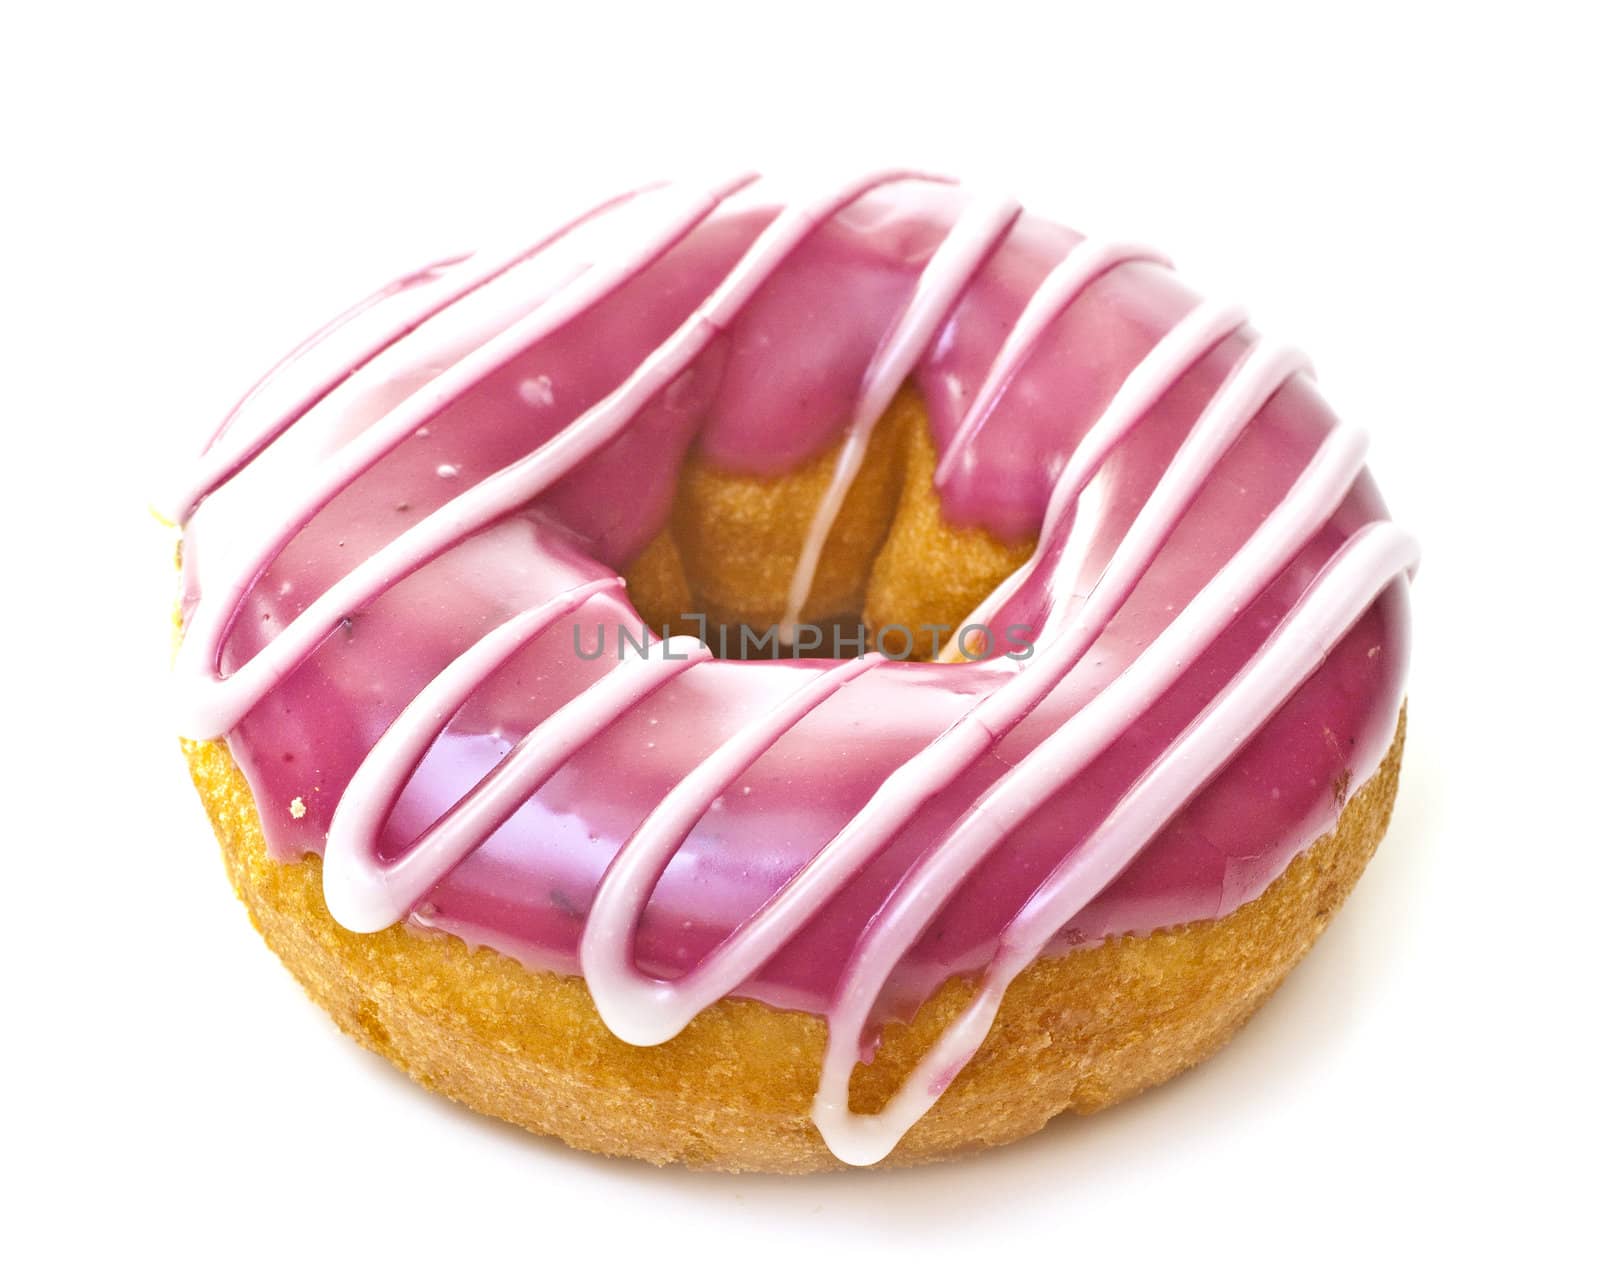 Donut on a white background with pink icing.
